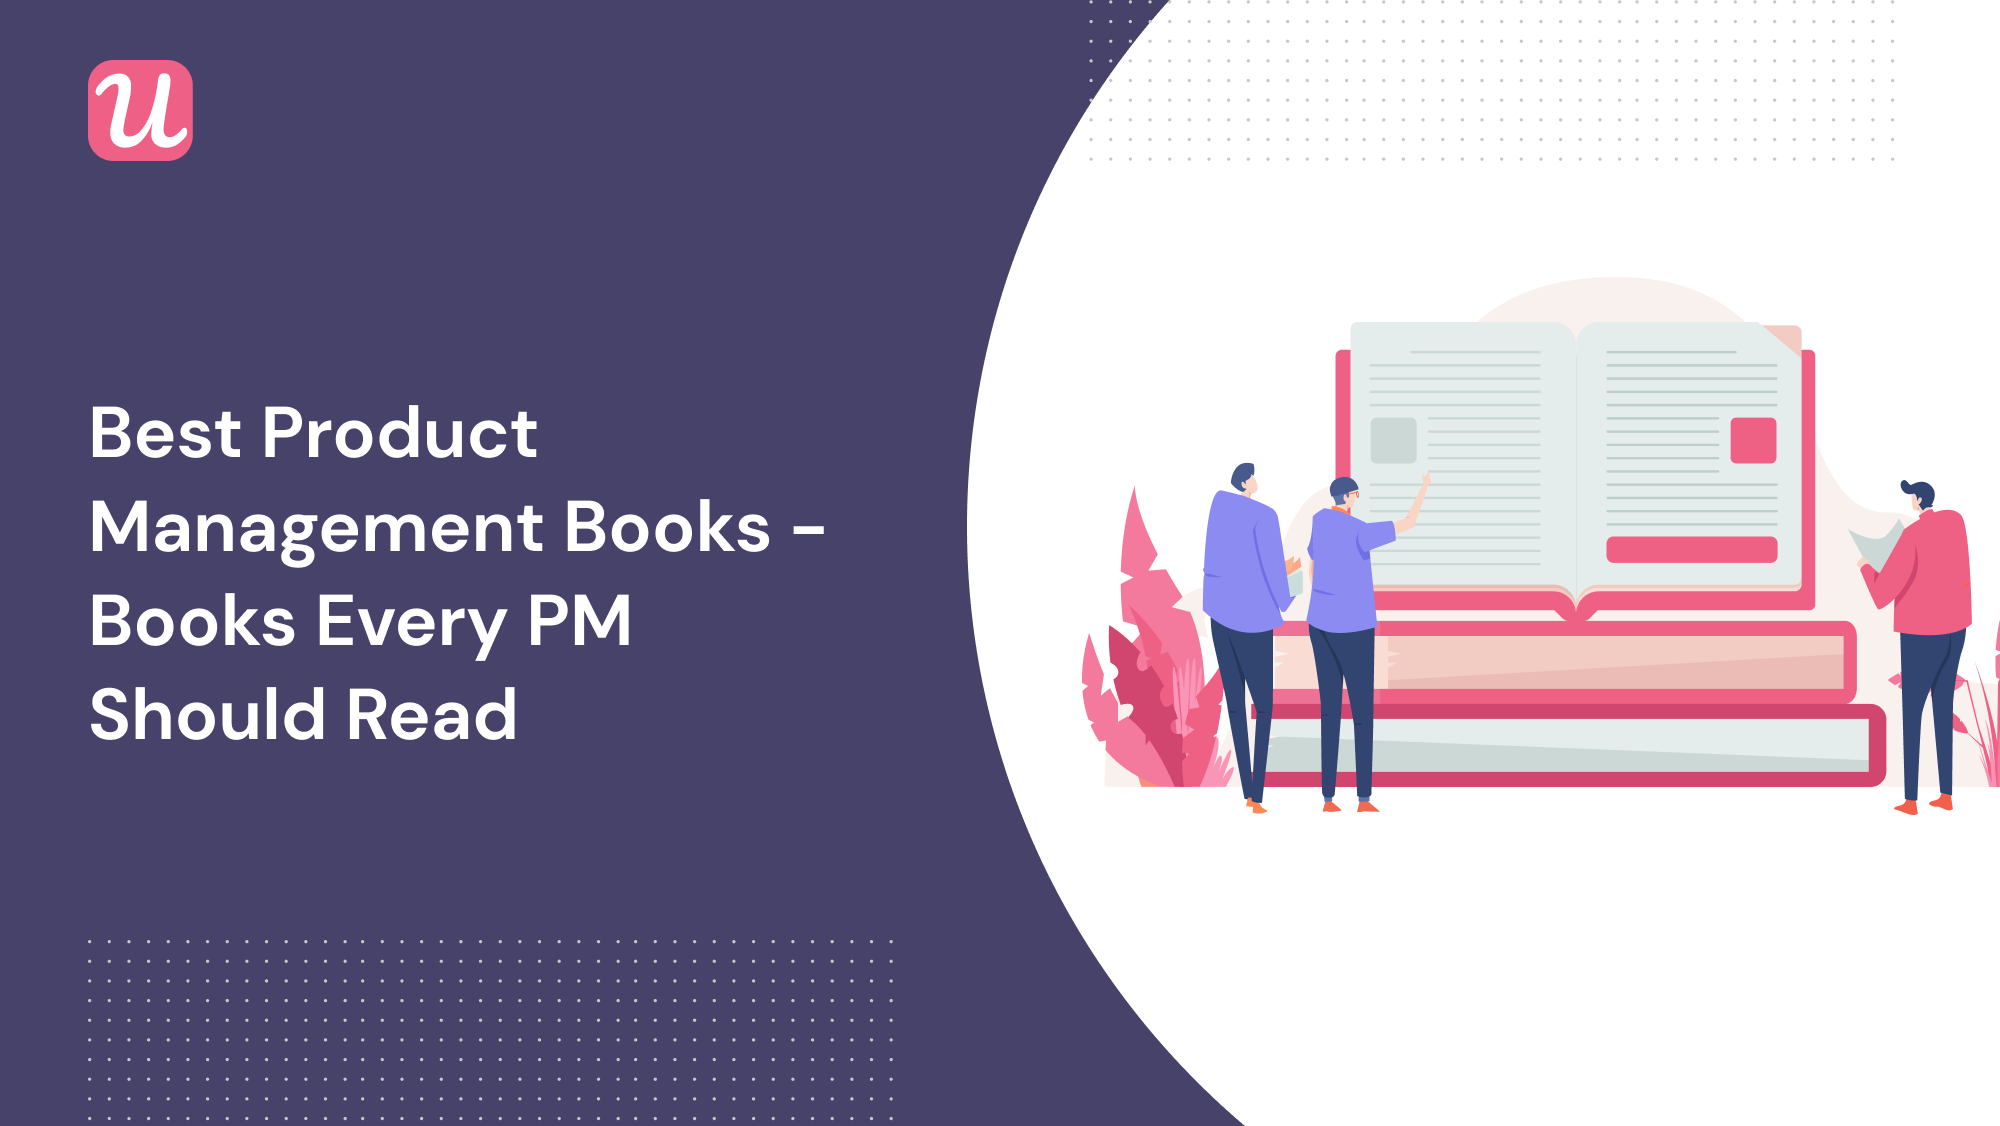 Best Product Management Books - Books Every PM Should Read